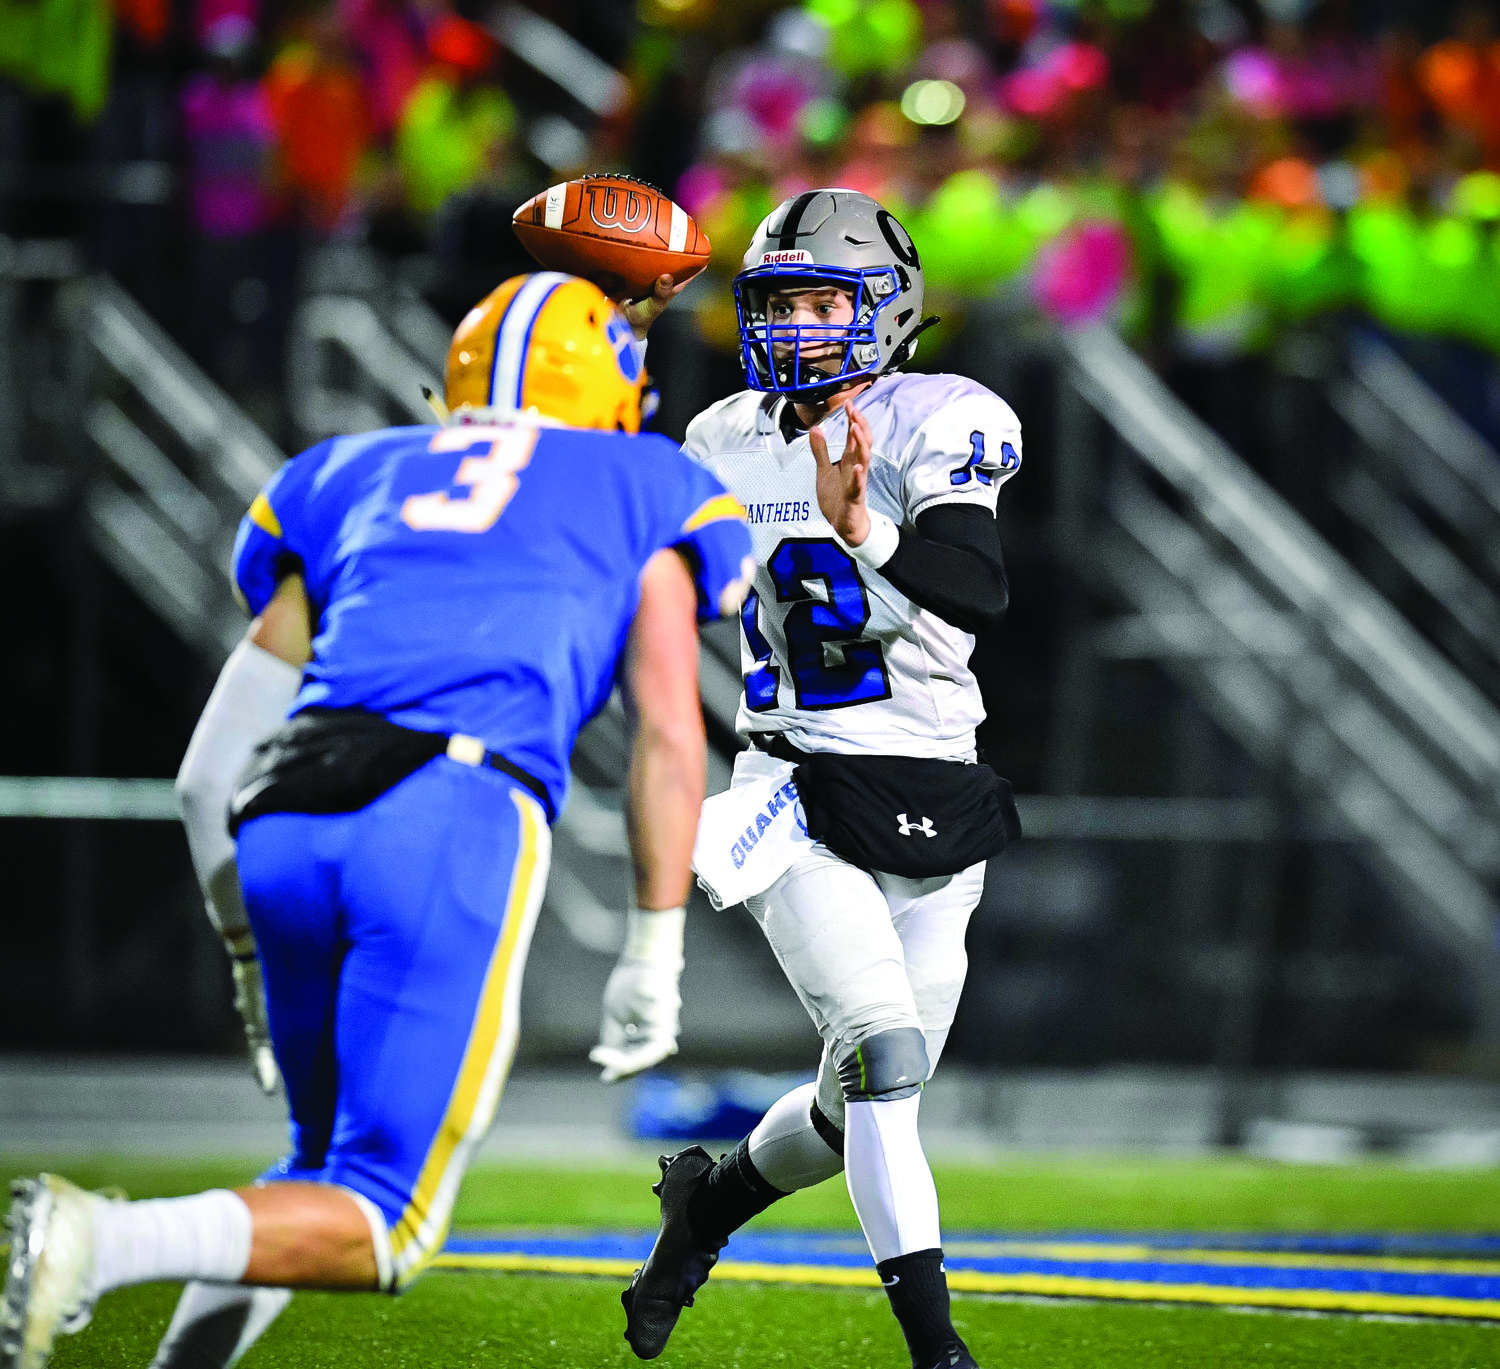 Quakertown’s Will Steich throws a short pass to Tyler Woodman for the second TD of the game.